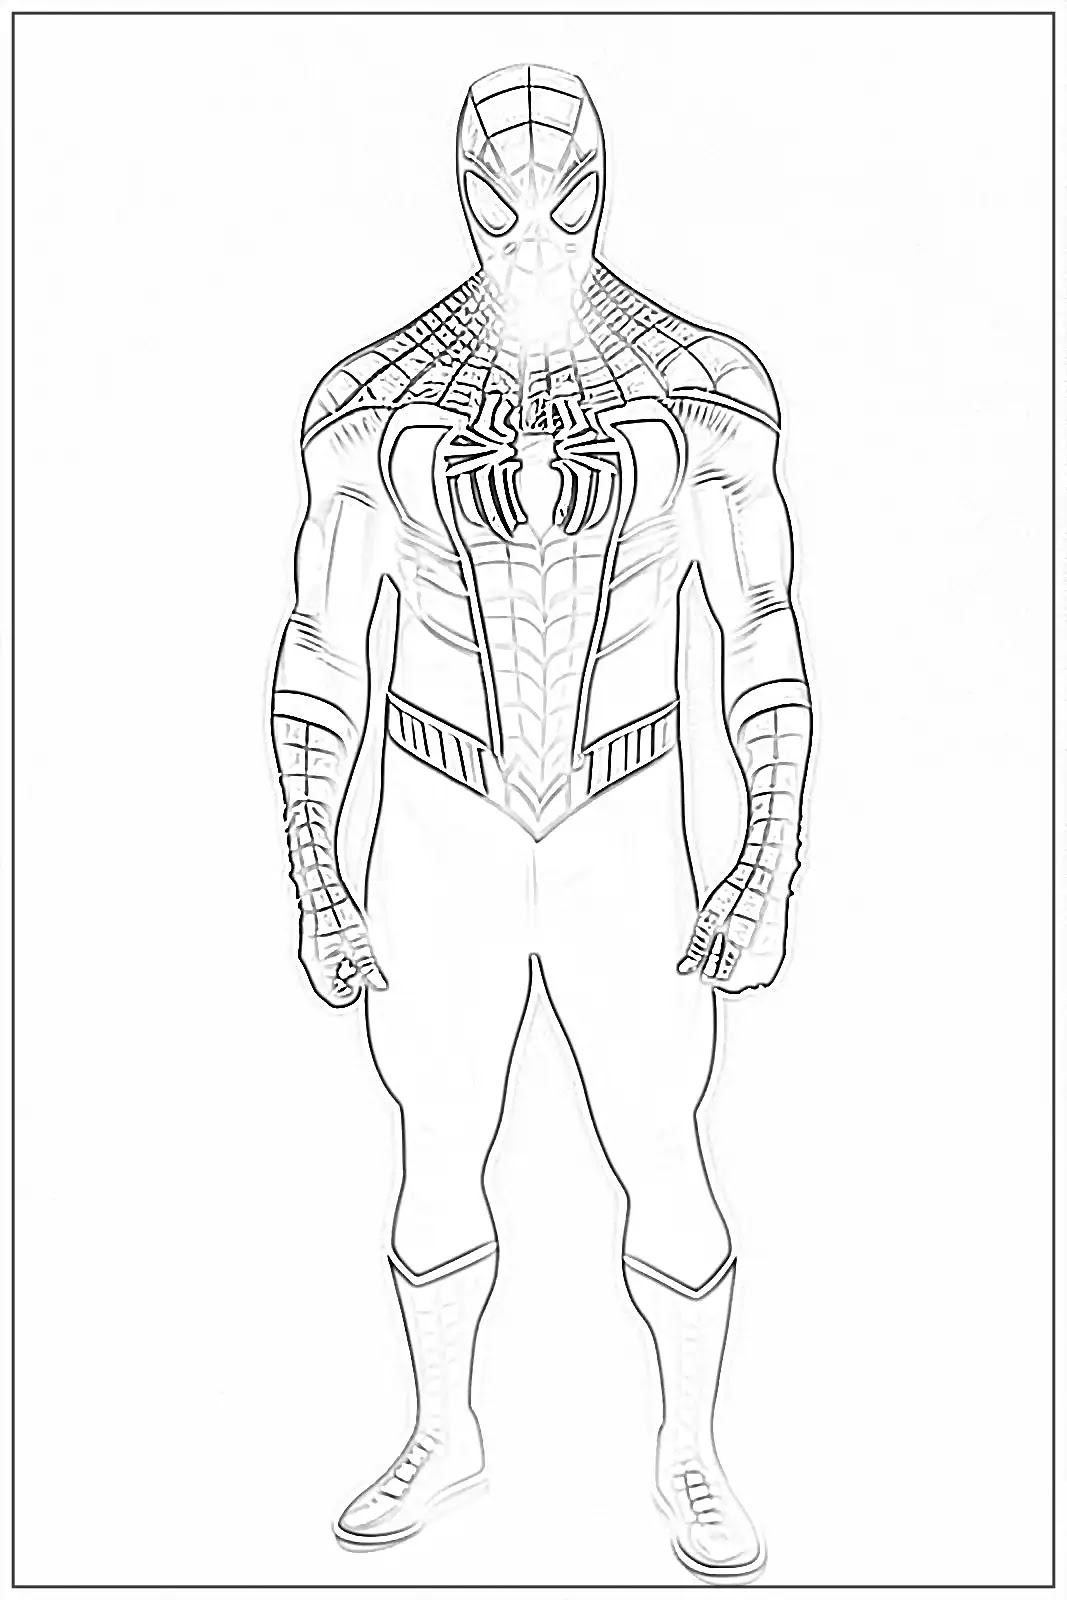 FREE! - Spider-Man™ Colouring Pages, Sony Pictures